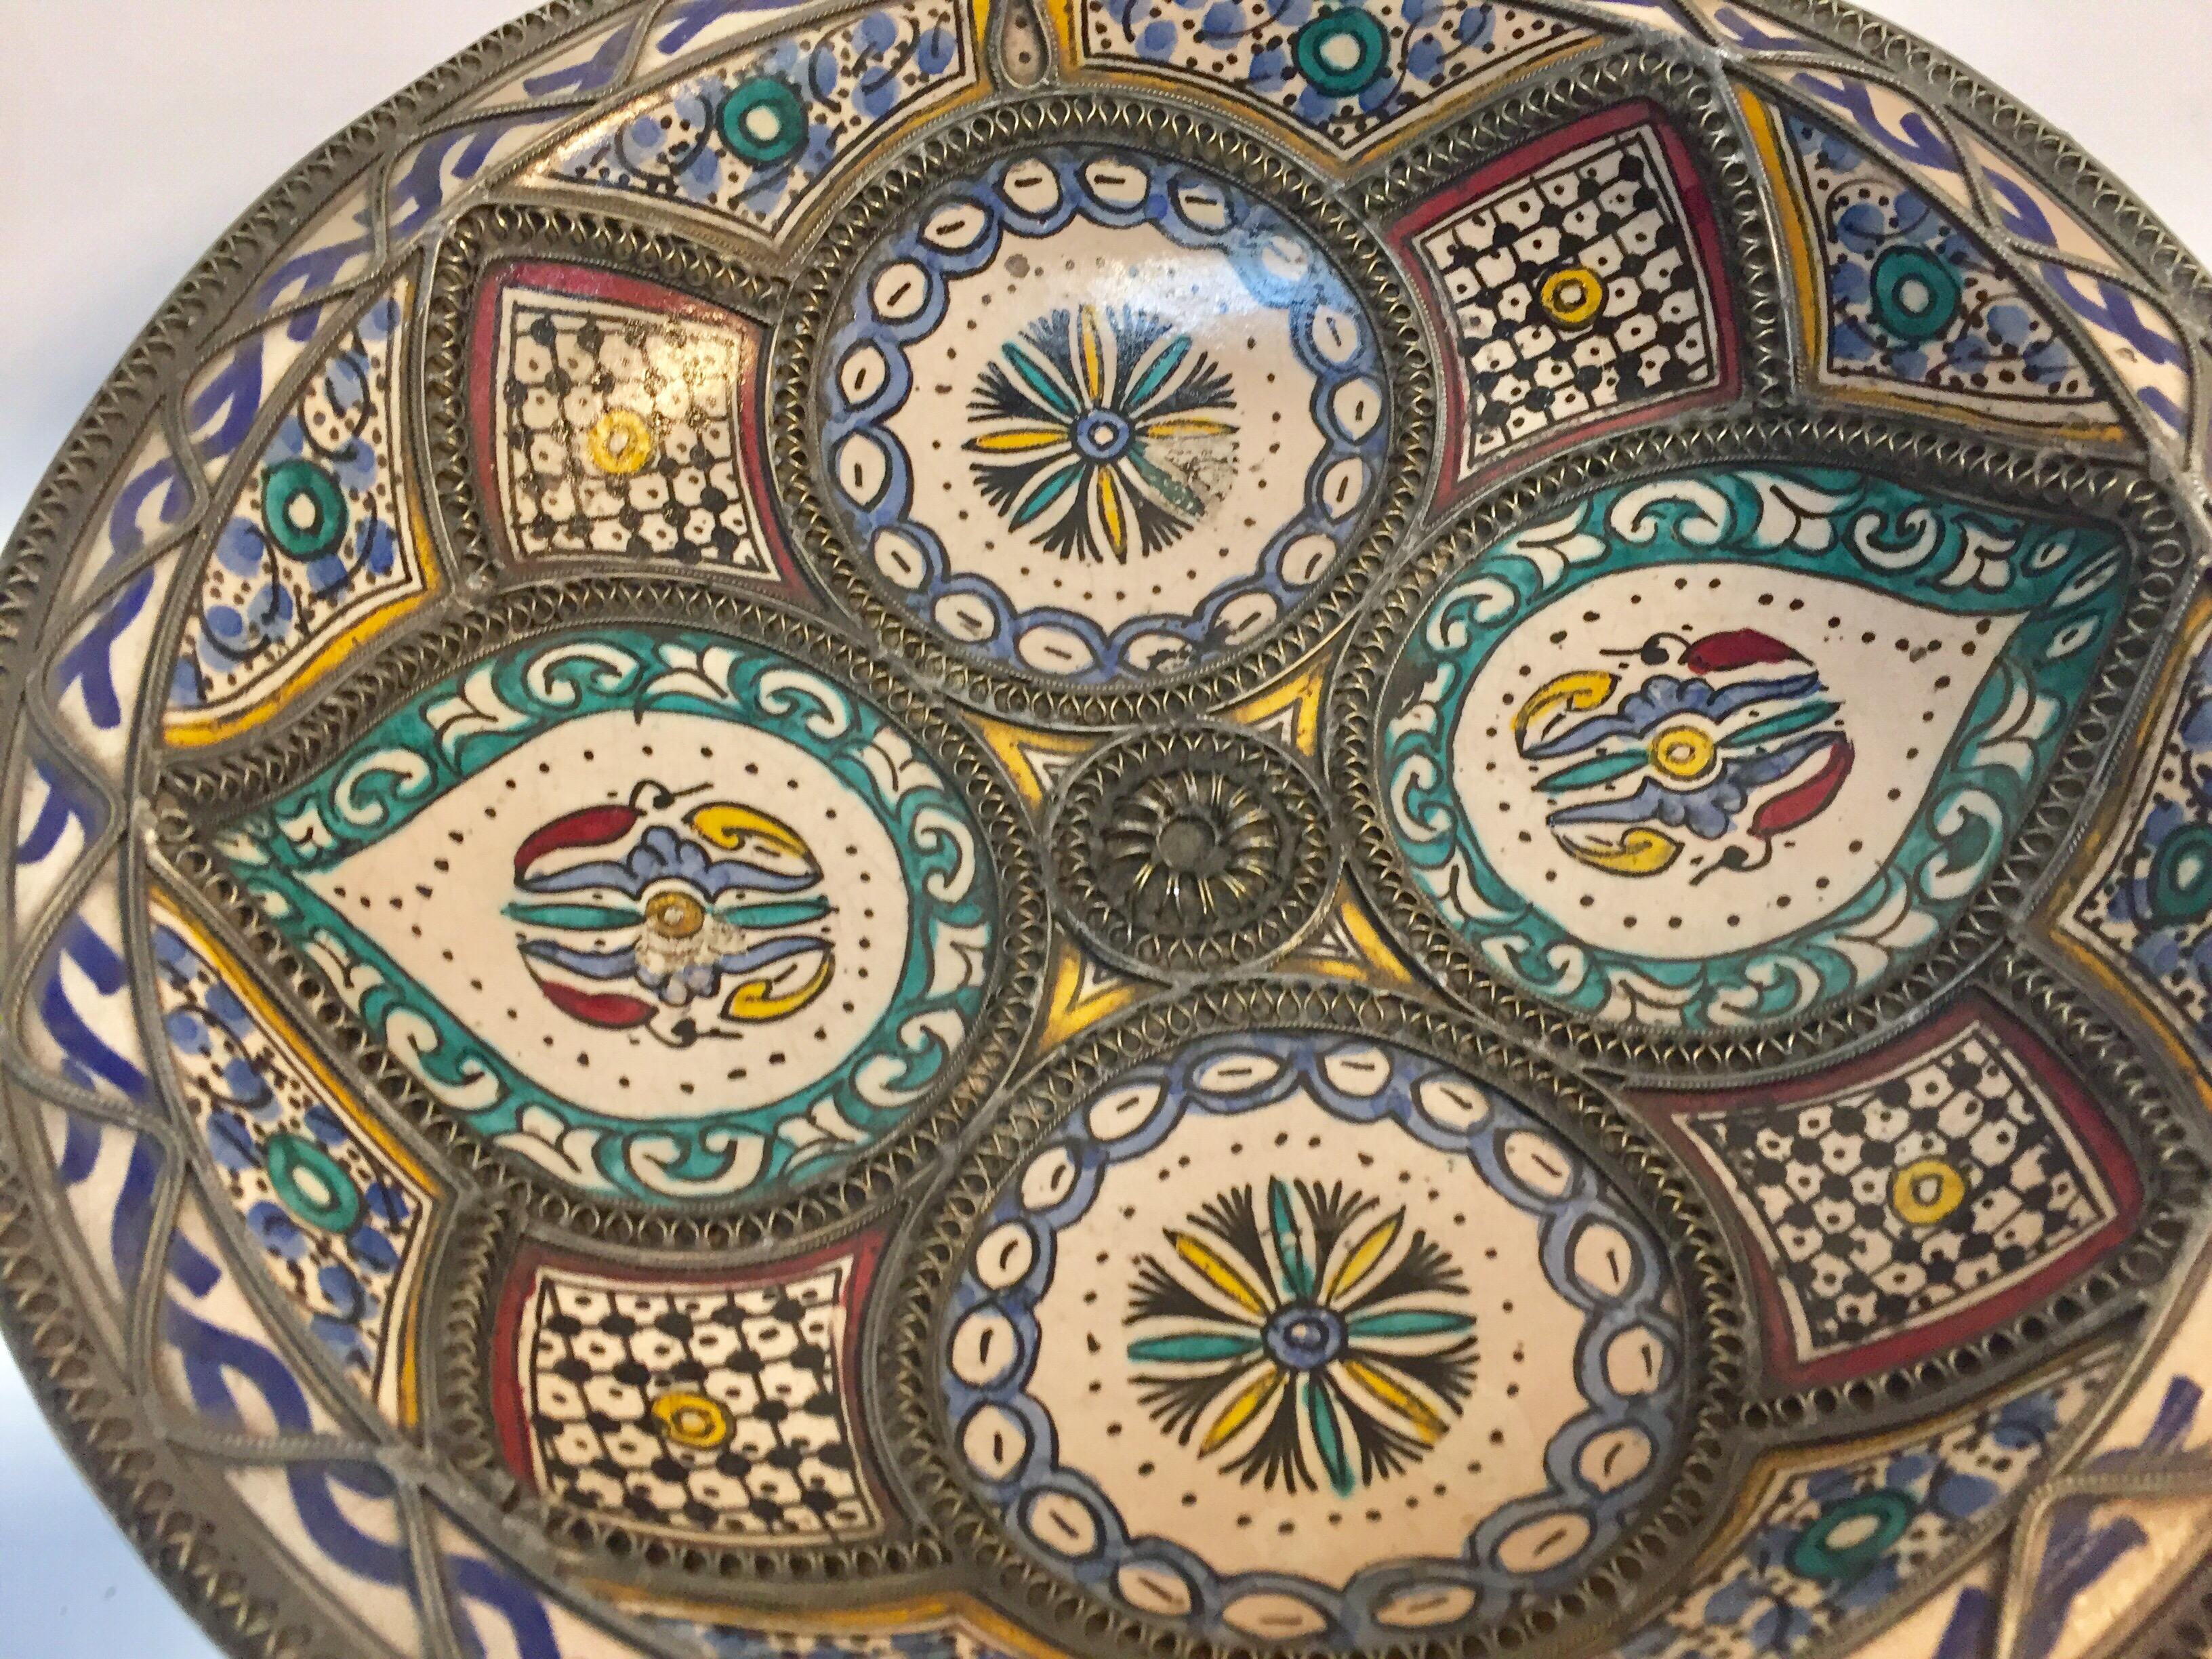 20th Century Decorative Moroccan Handcrafted Ceramic Bowl from Fez